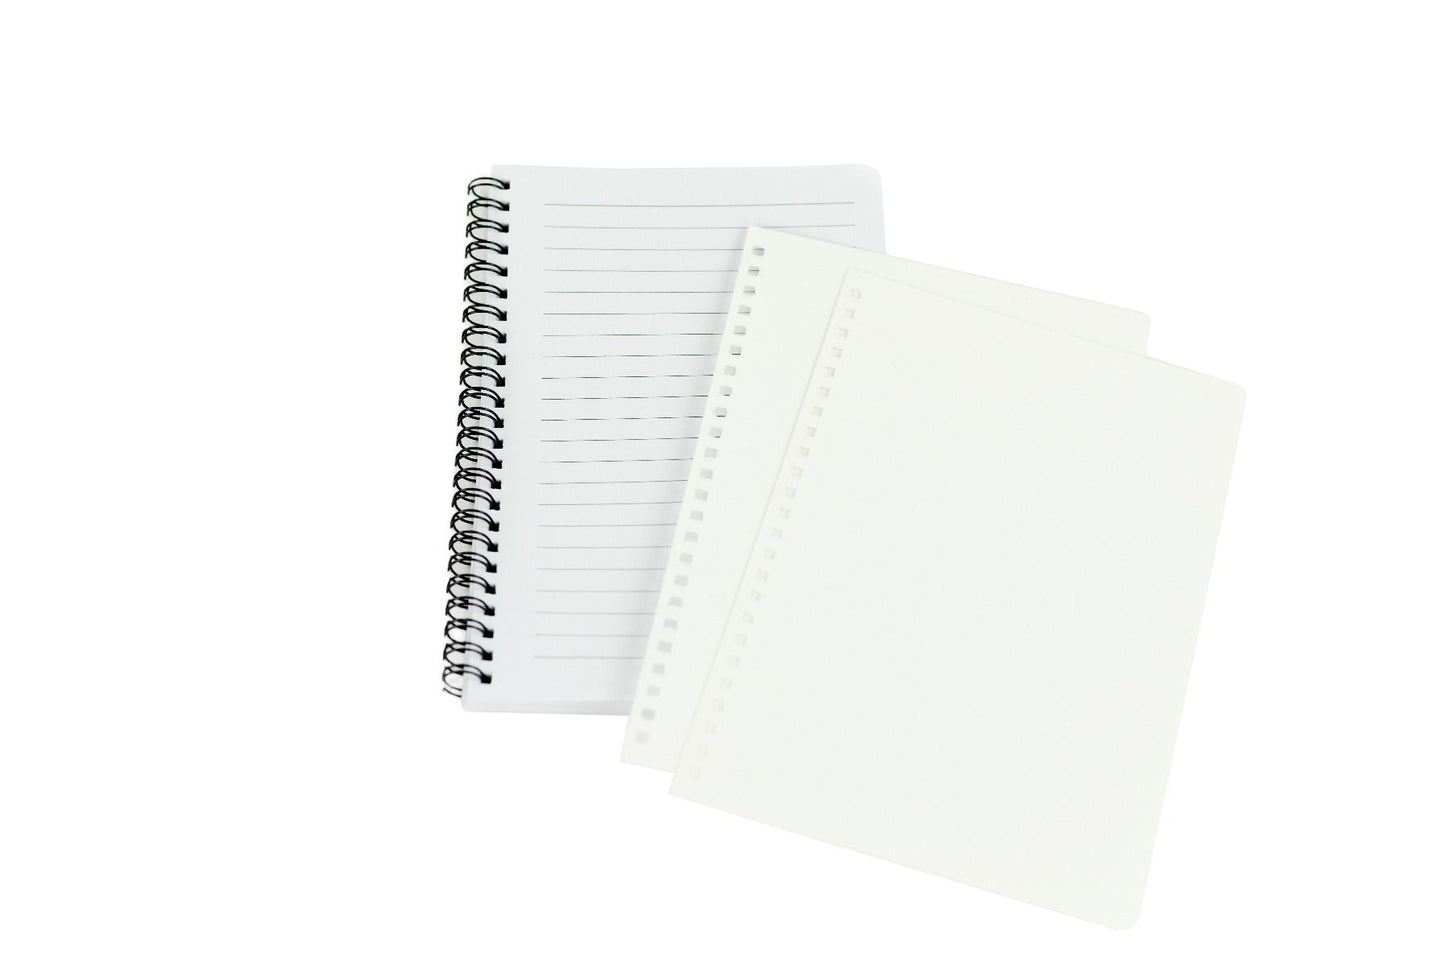 Sublimation Spiral-Bound A5 Plastic Notebook - Orcacoatings, the